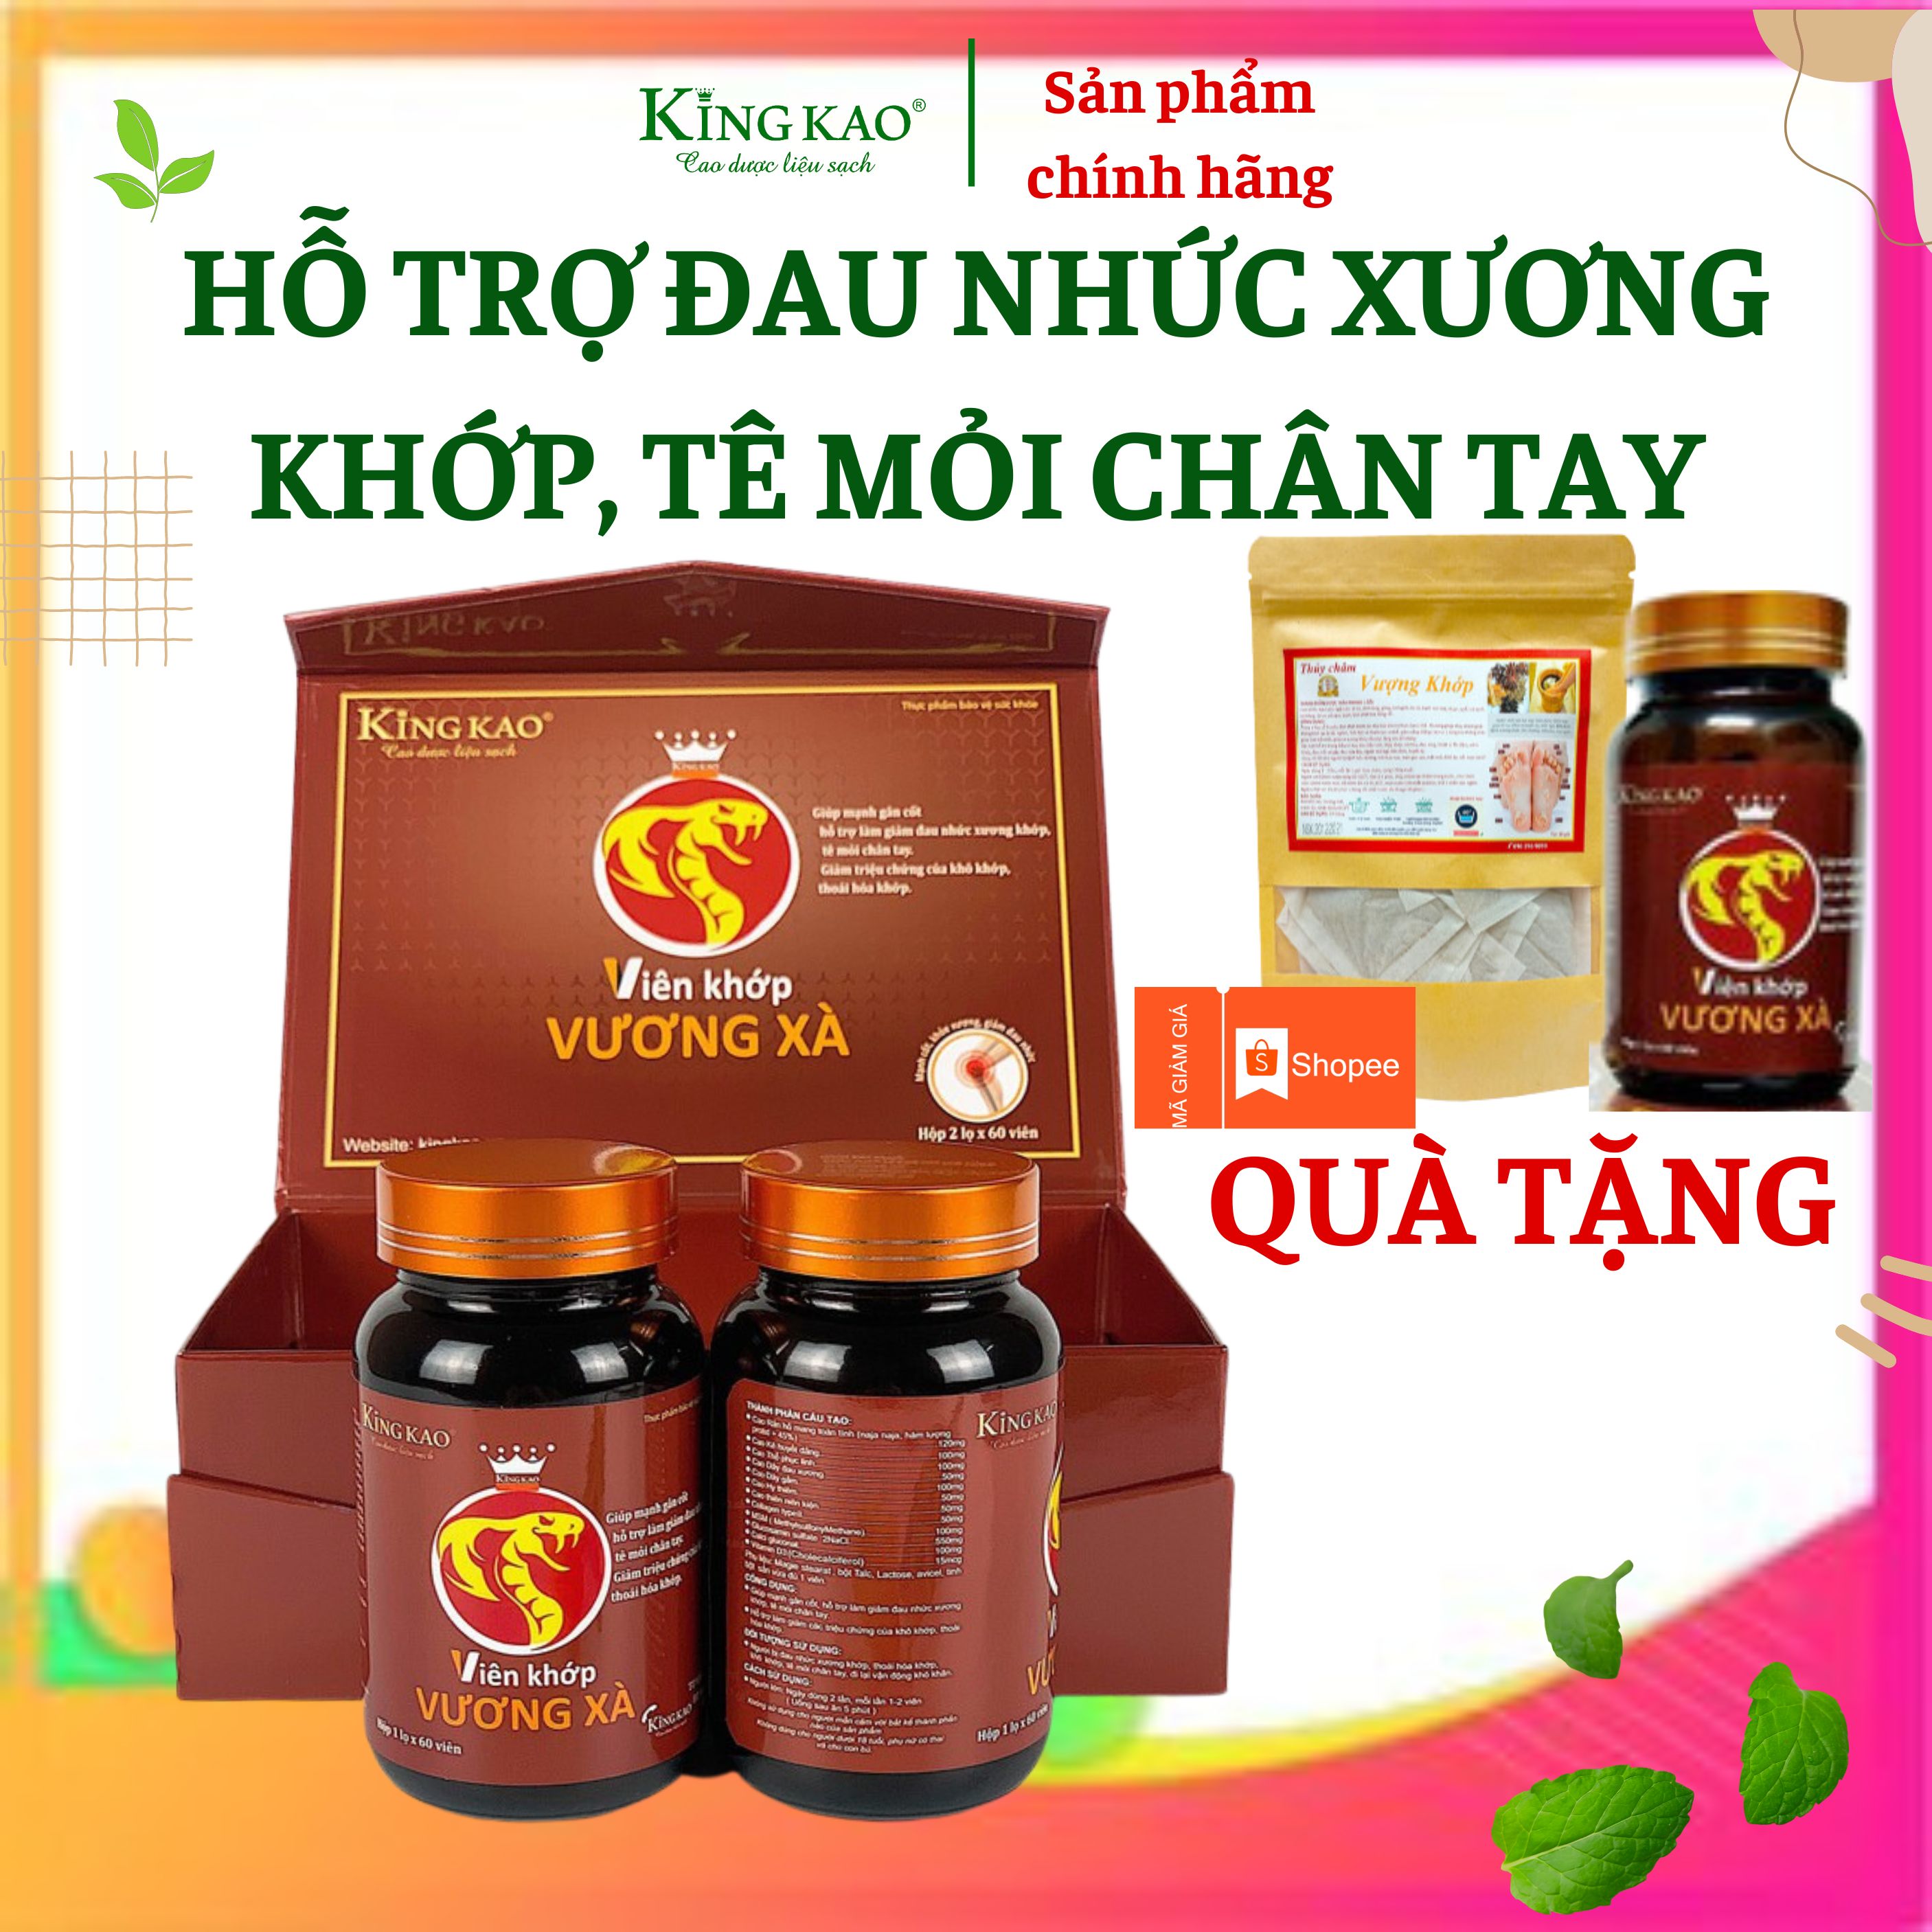 Kingkao knee joint pain tablet king of soap can joint pain relief from